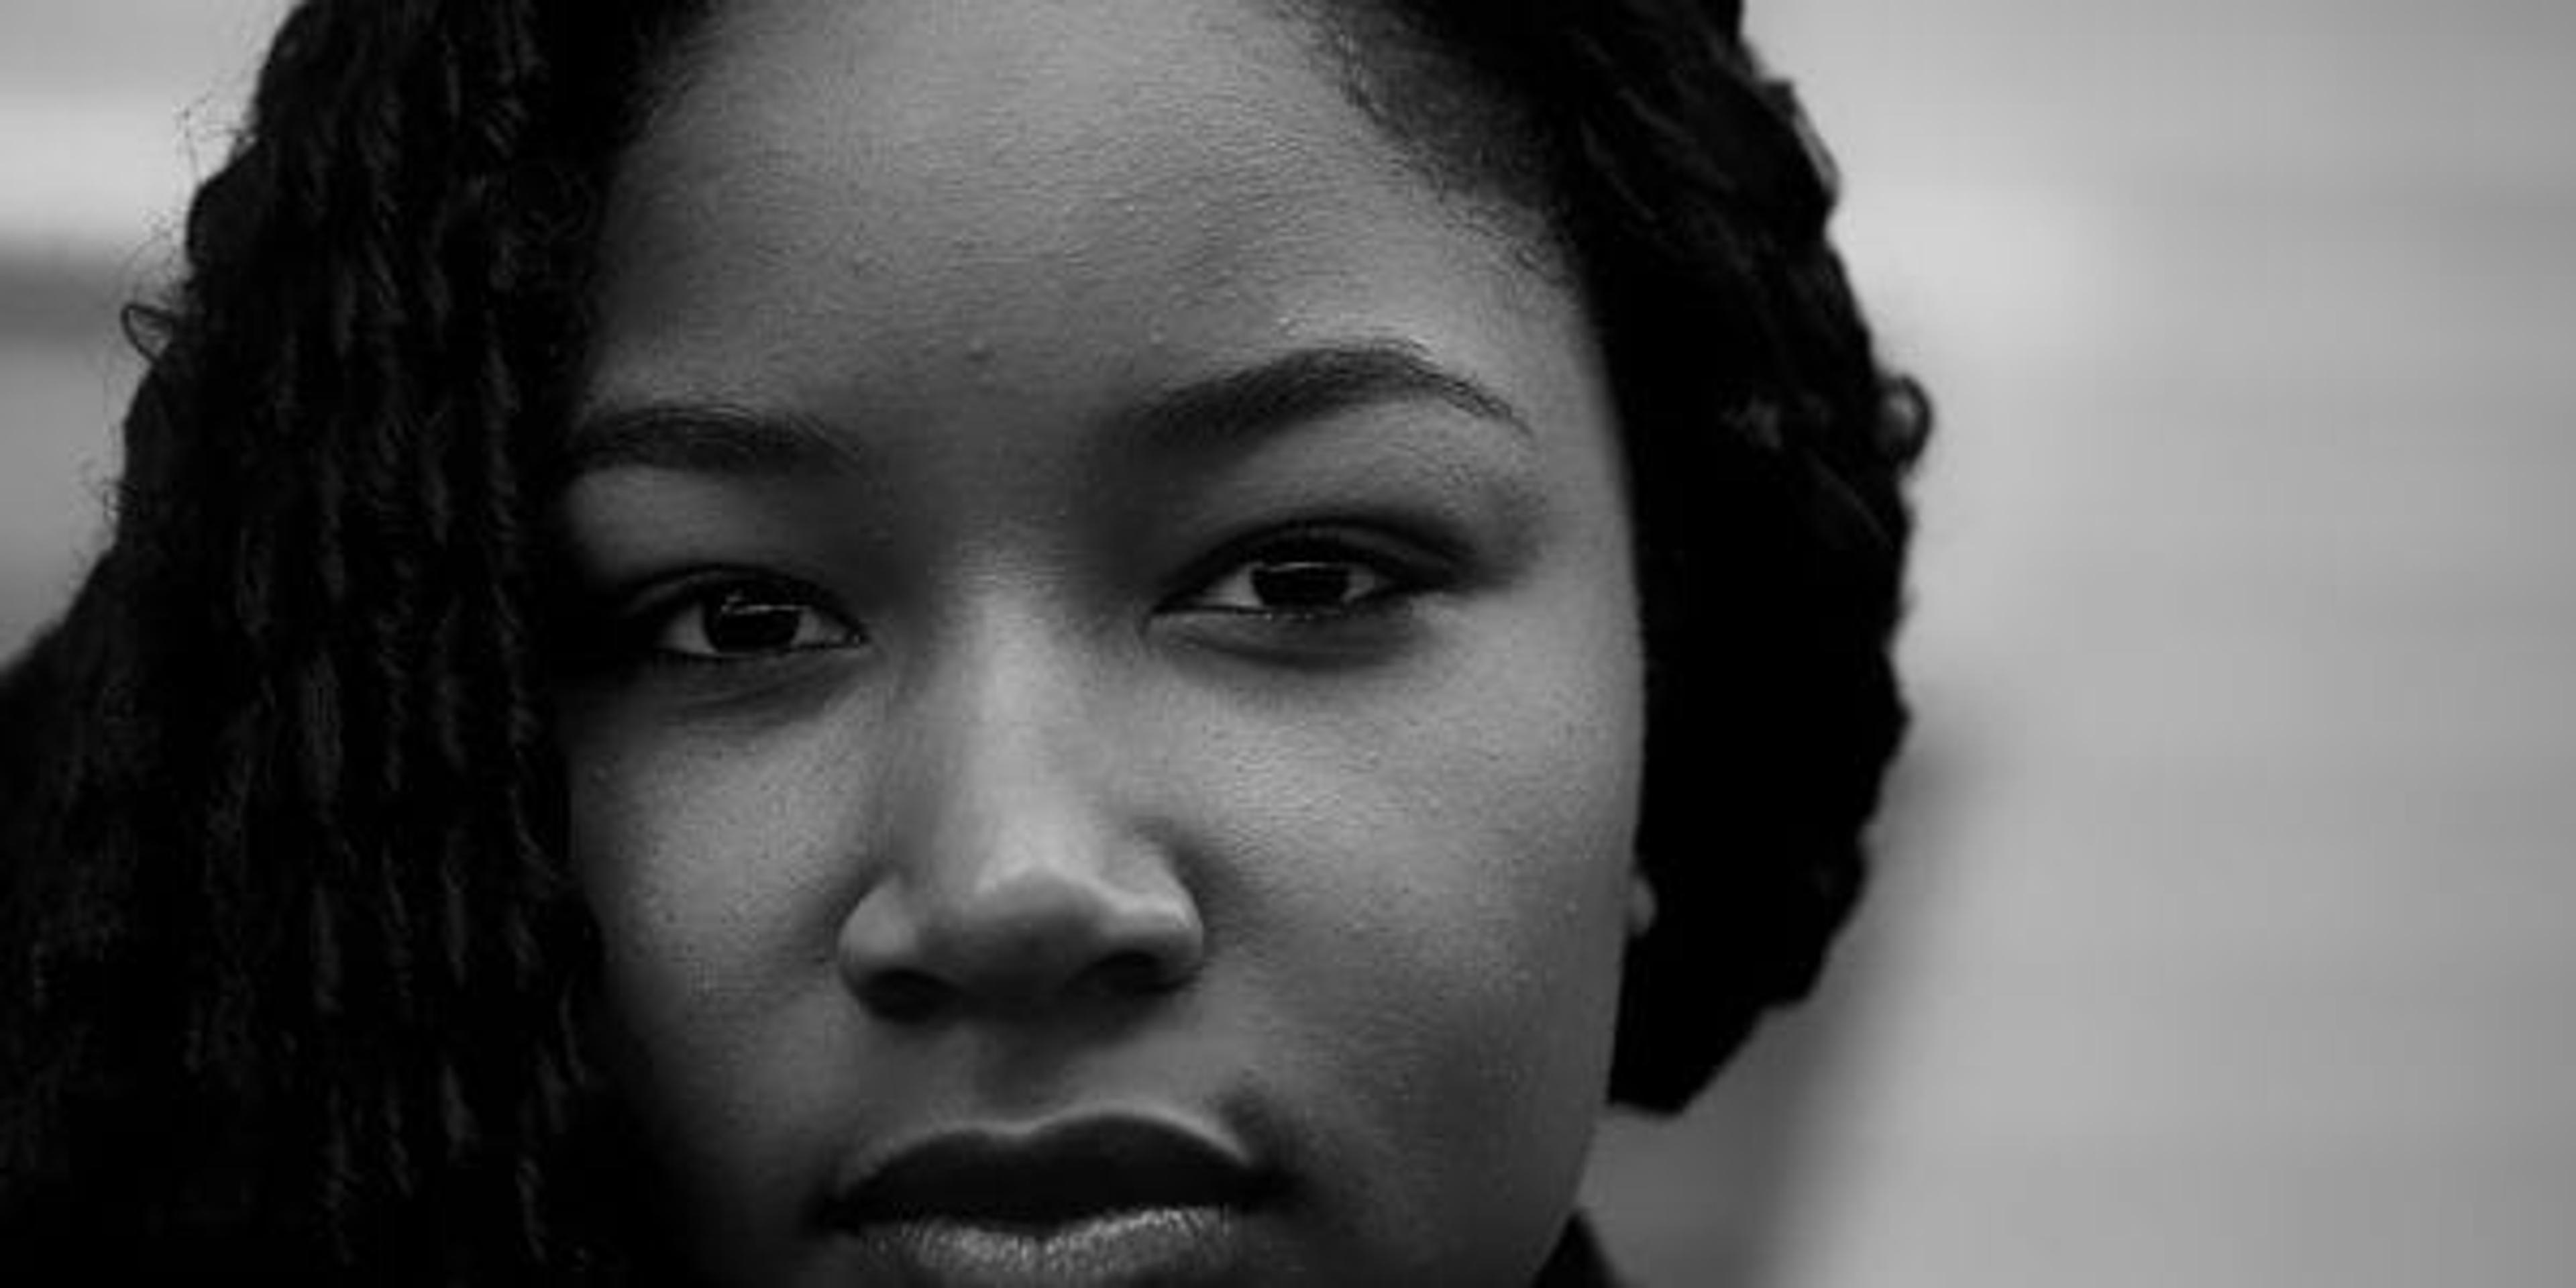 Black and white portrait of young black woman